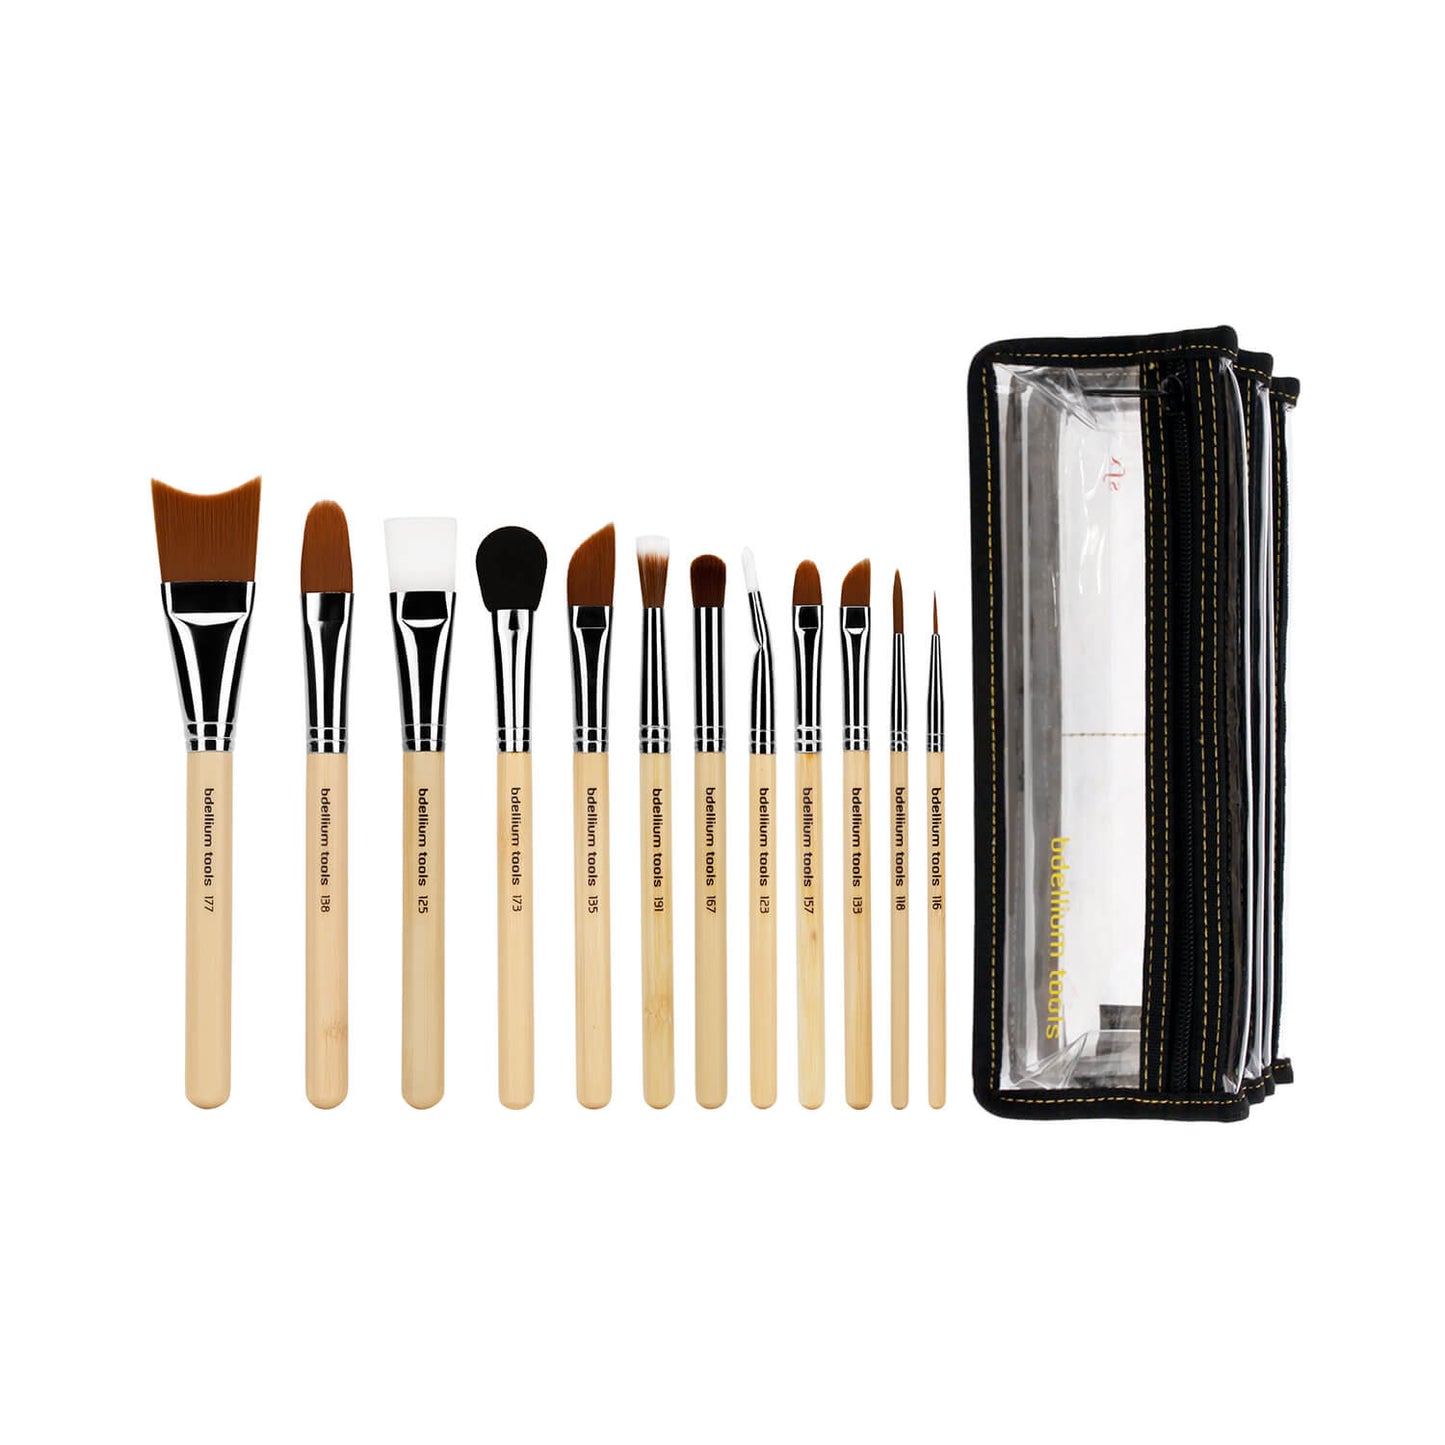 BDellium Tools SFX Brush Set 12 pc. with Double Pouch 2nd Collection